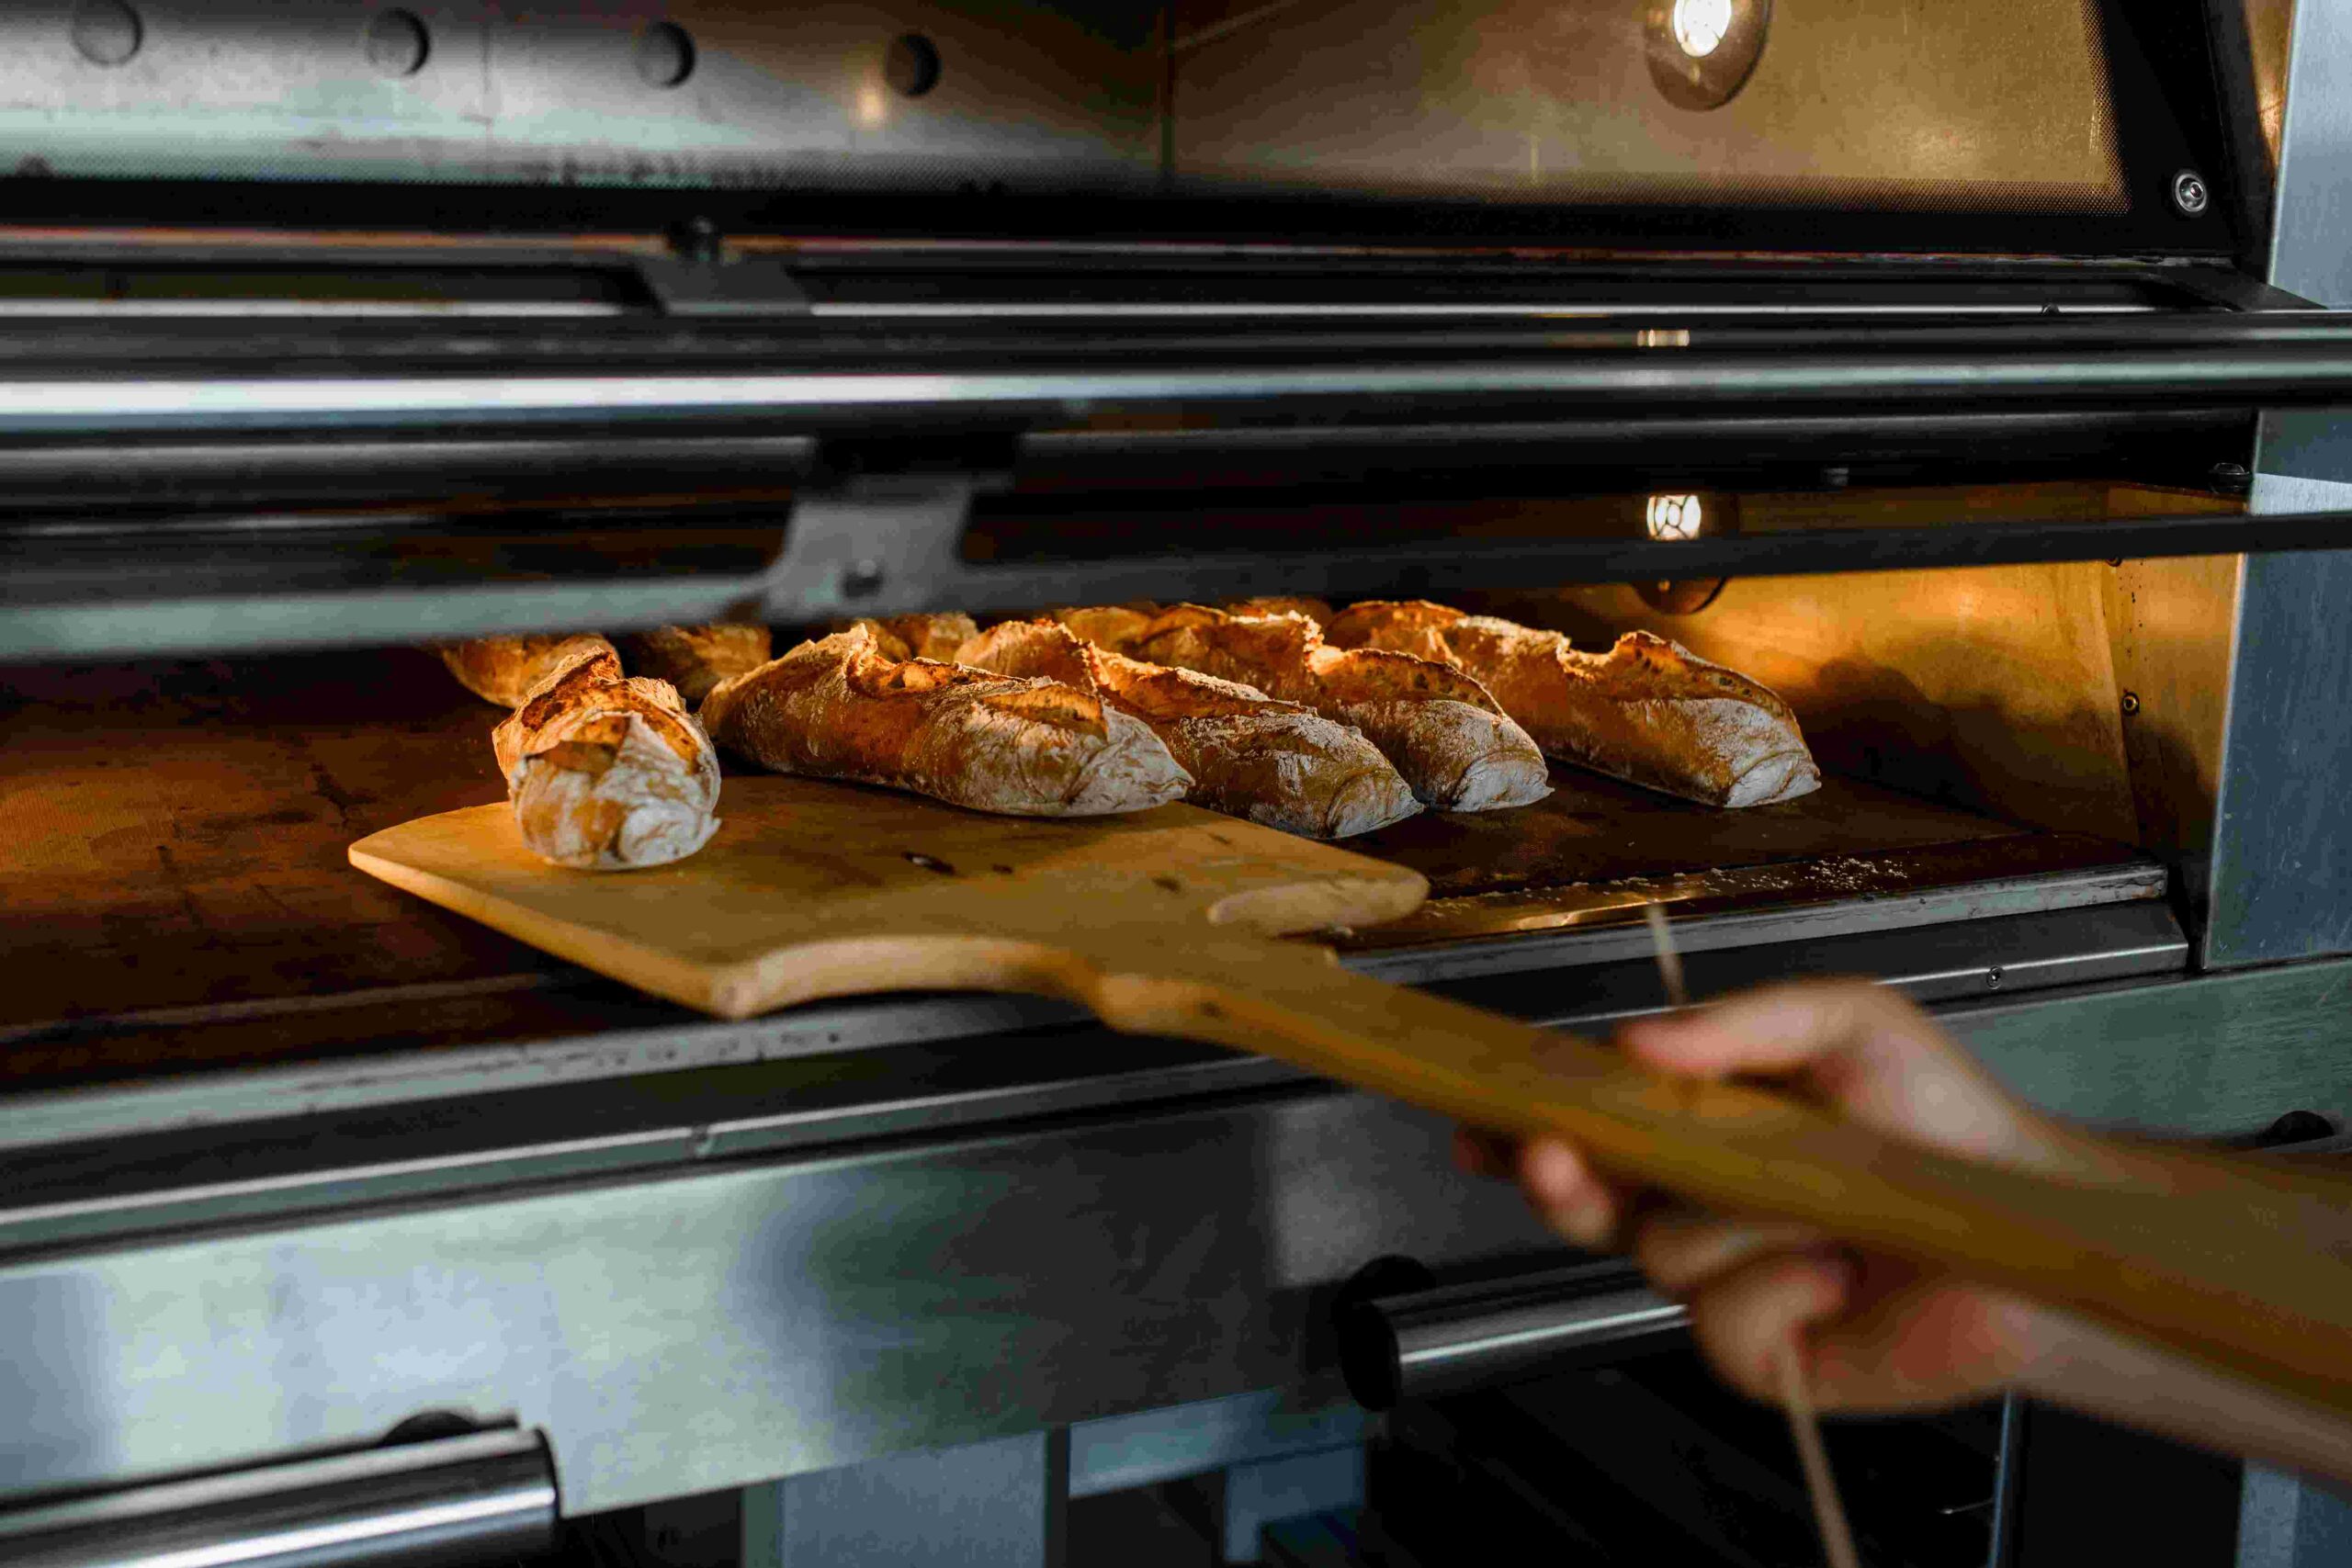 Bakery: reduction of oven exhaust air flow